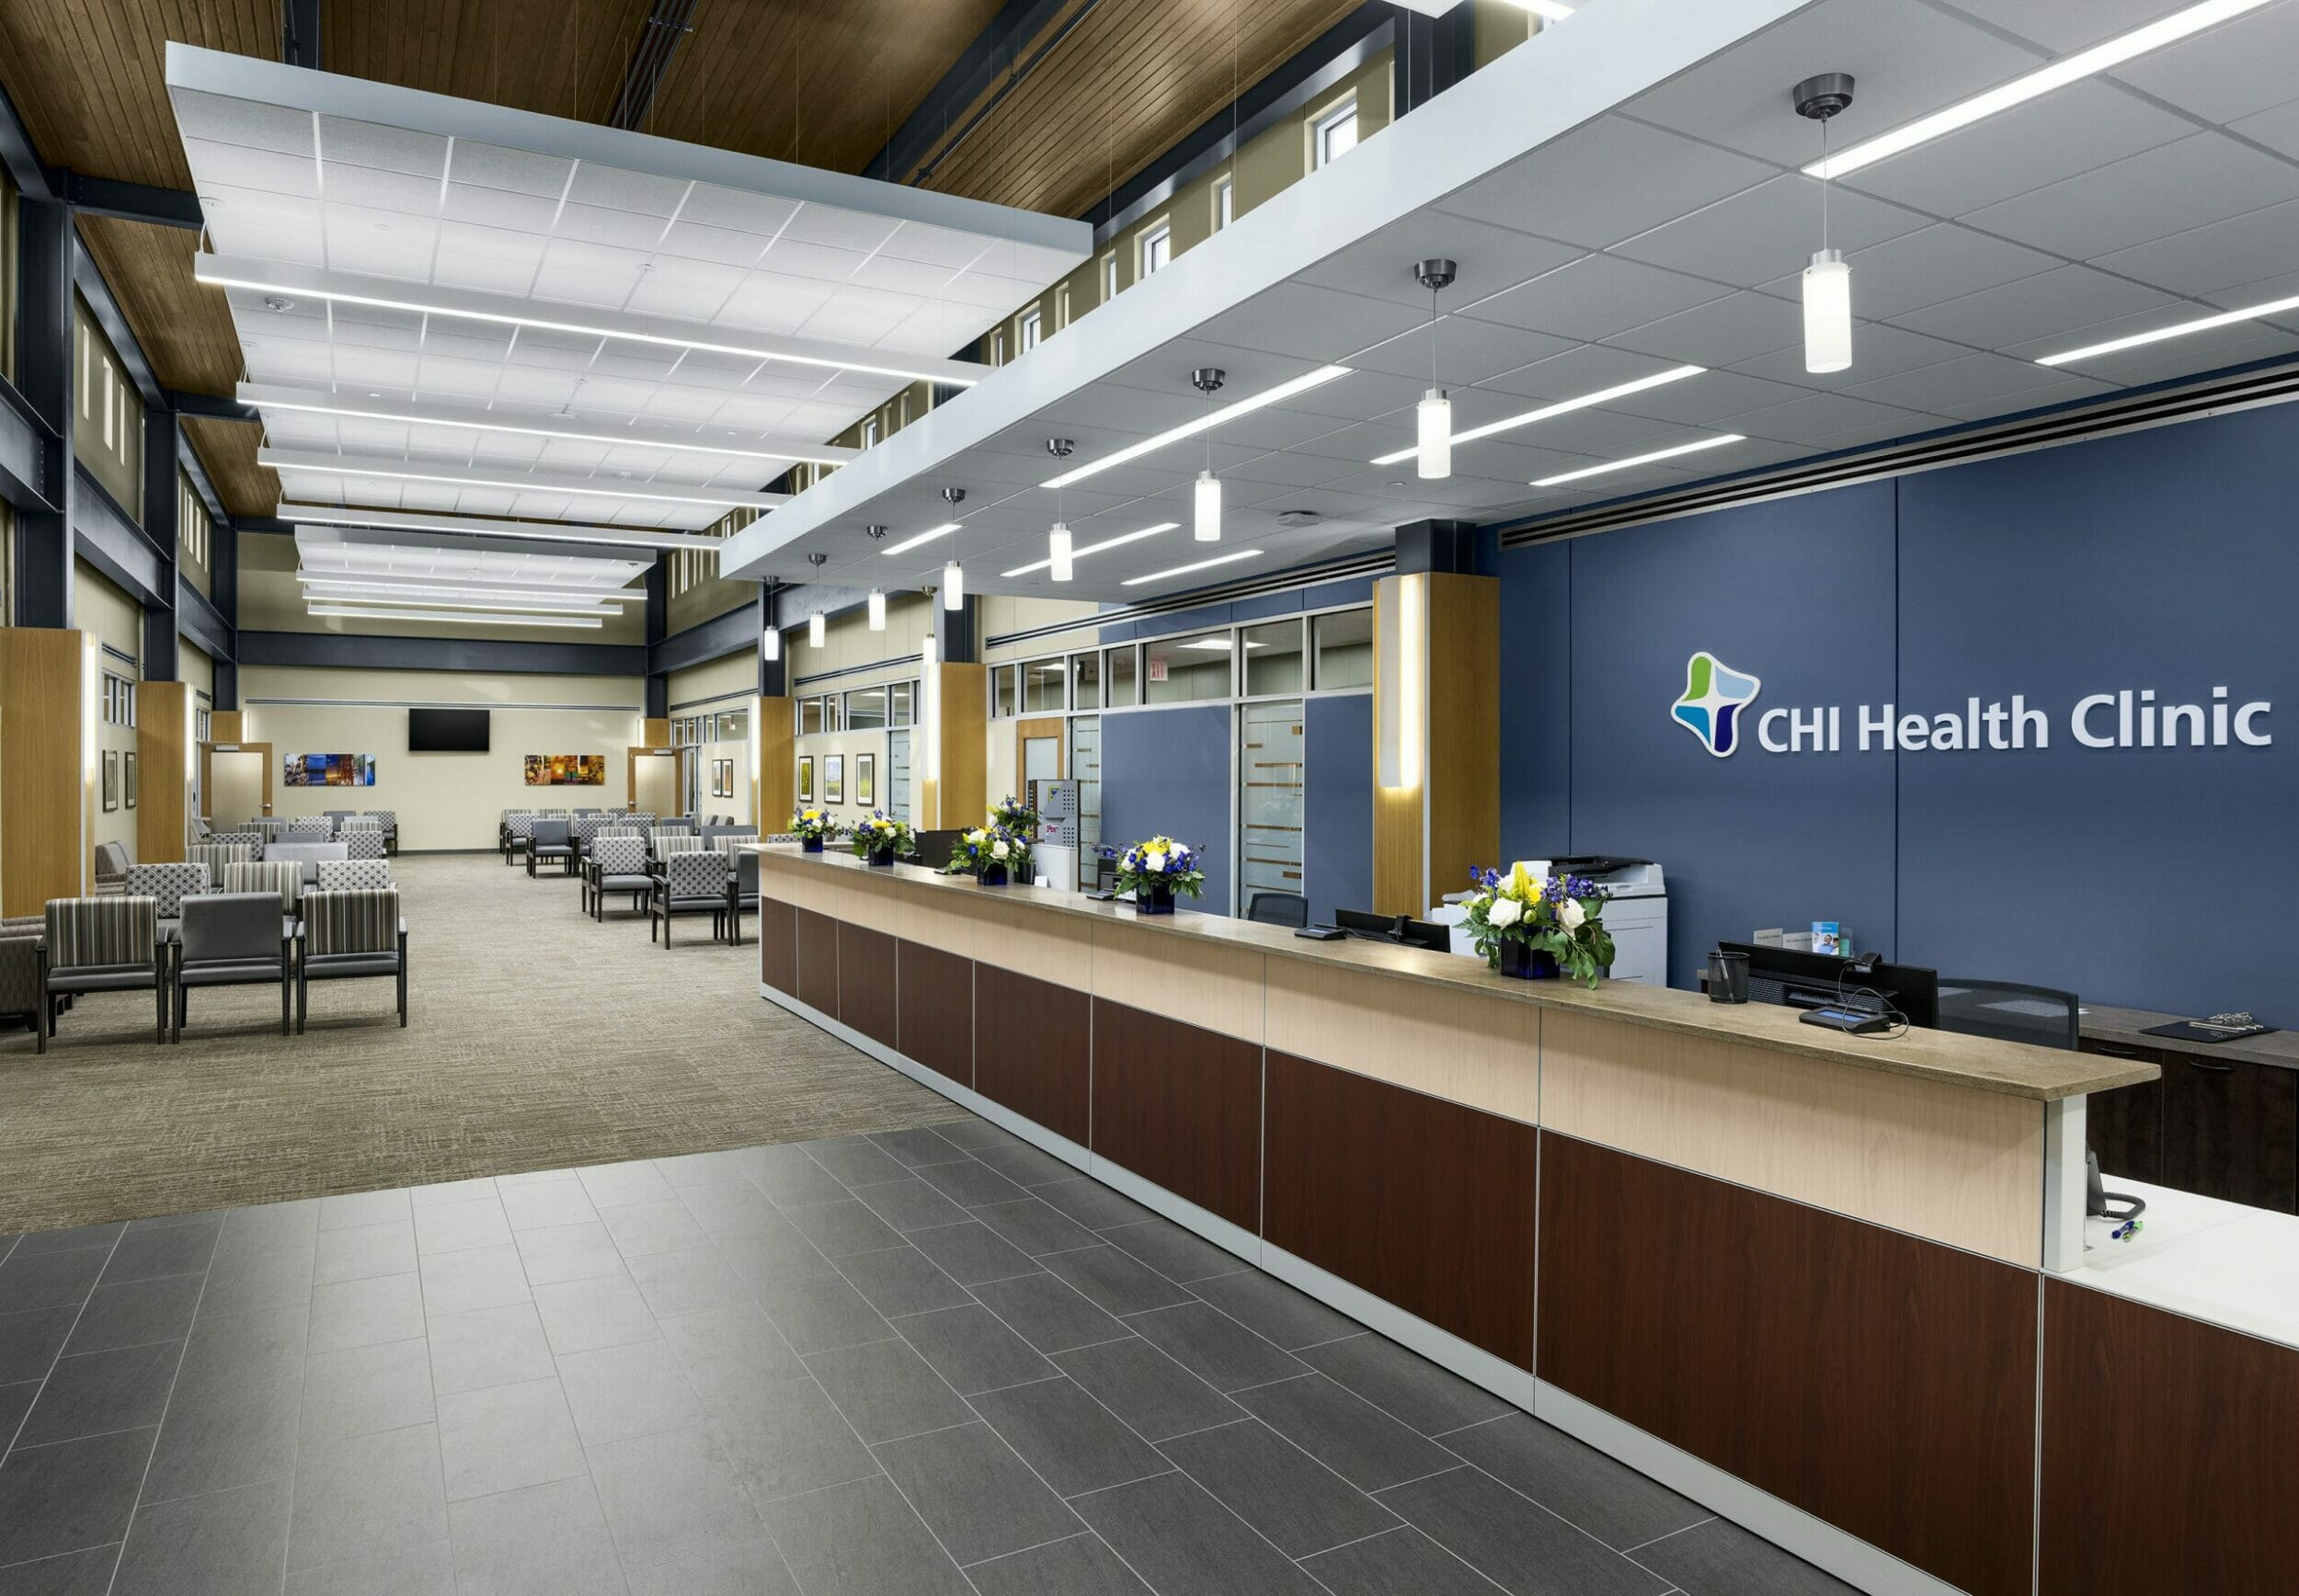 CHI Health Clinic lobby with tiled and carpeted floors, multiple rows of chairs, and a long wood front desk with multiple desks